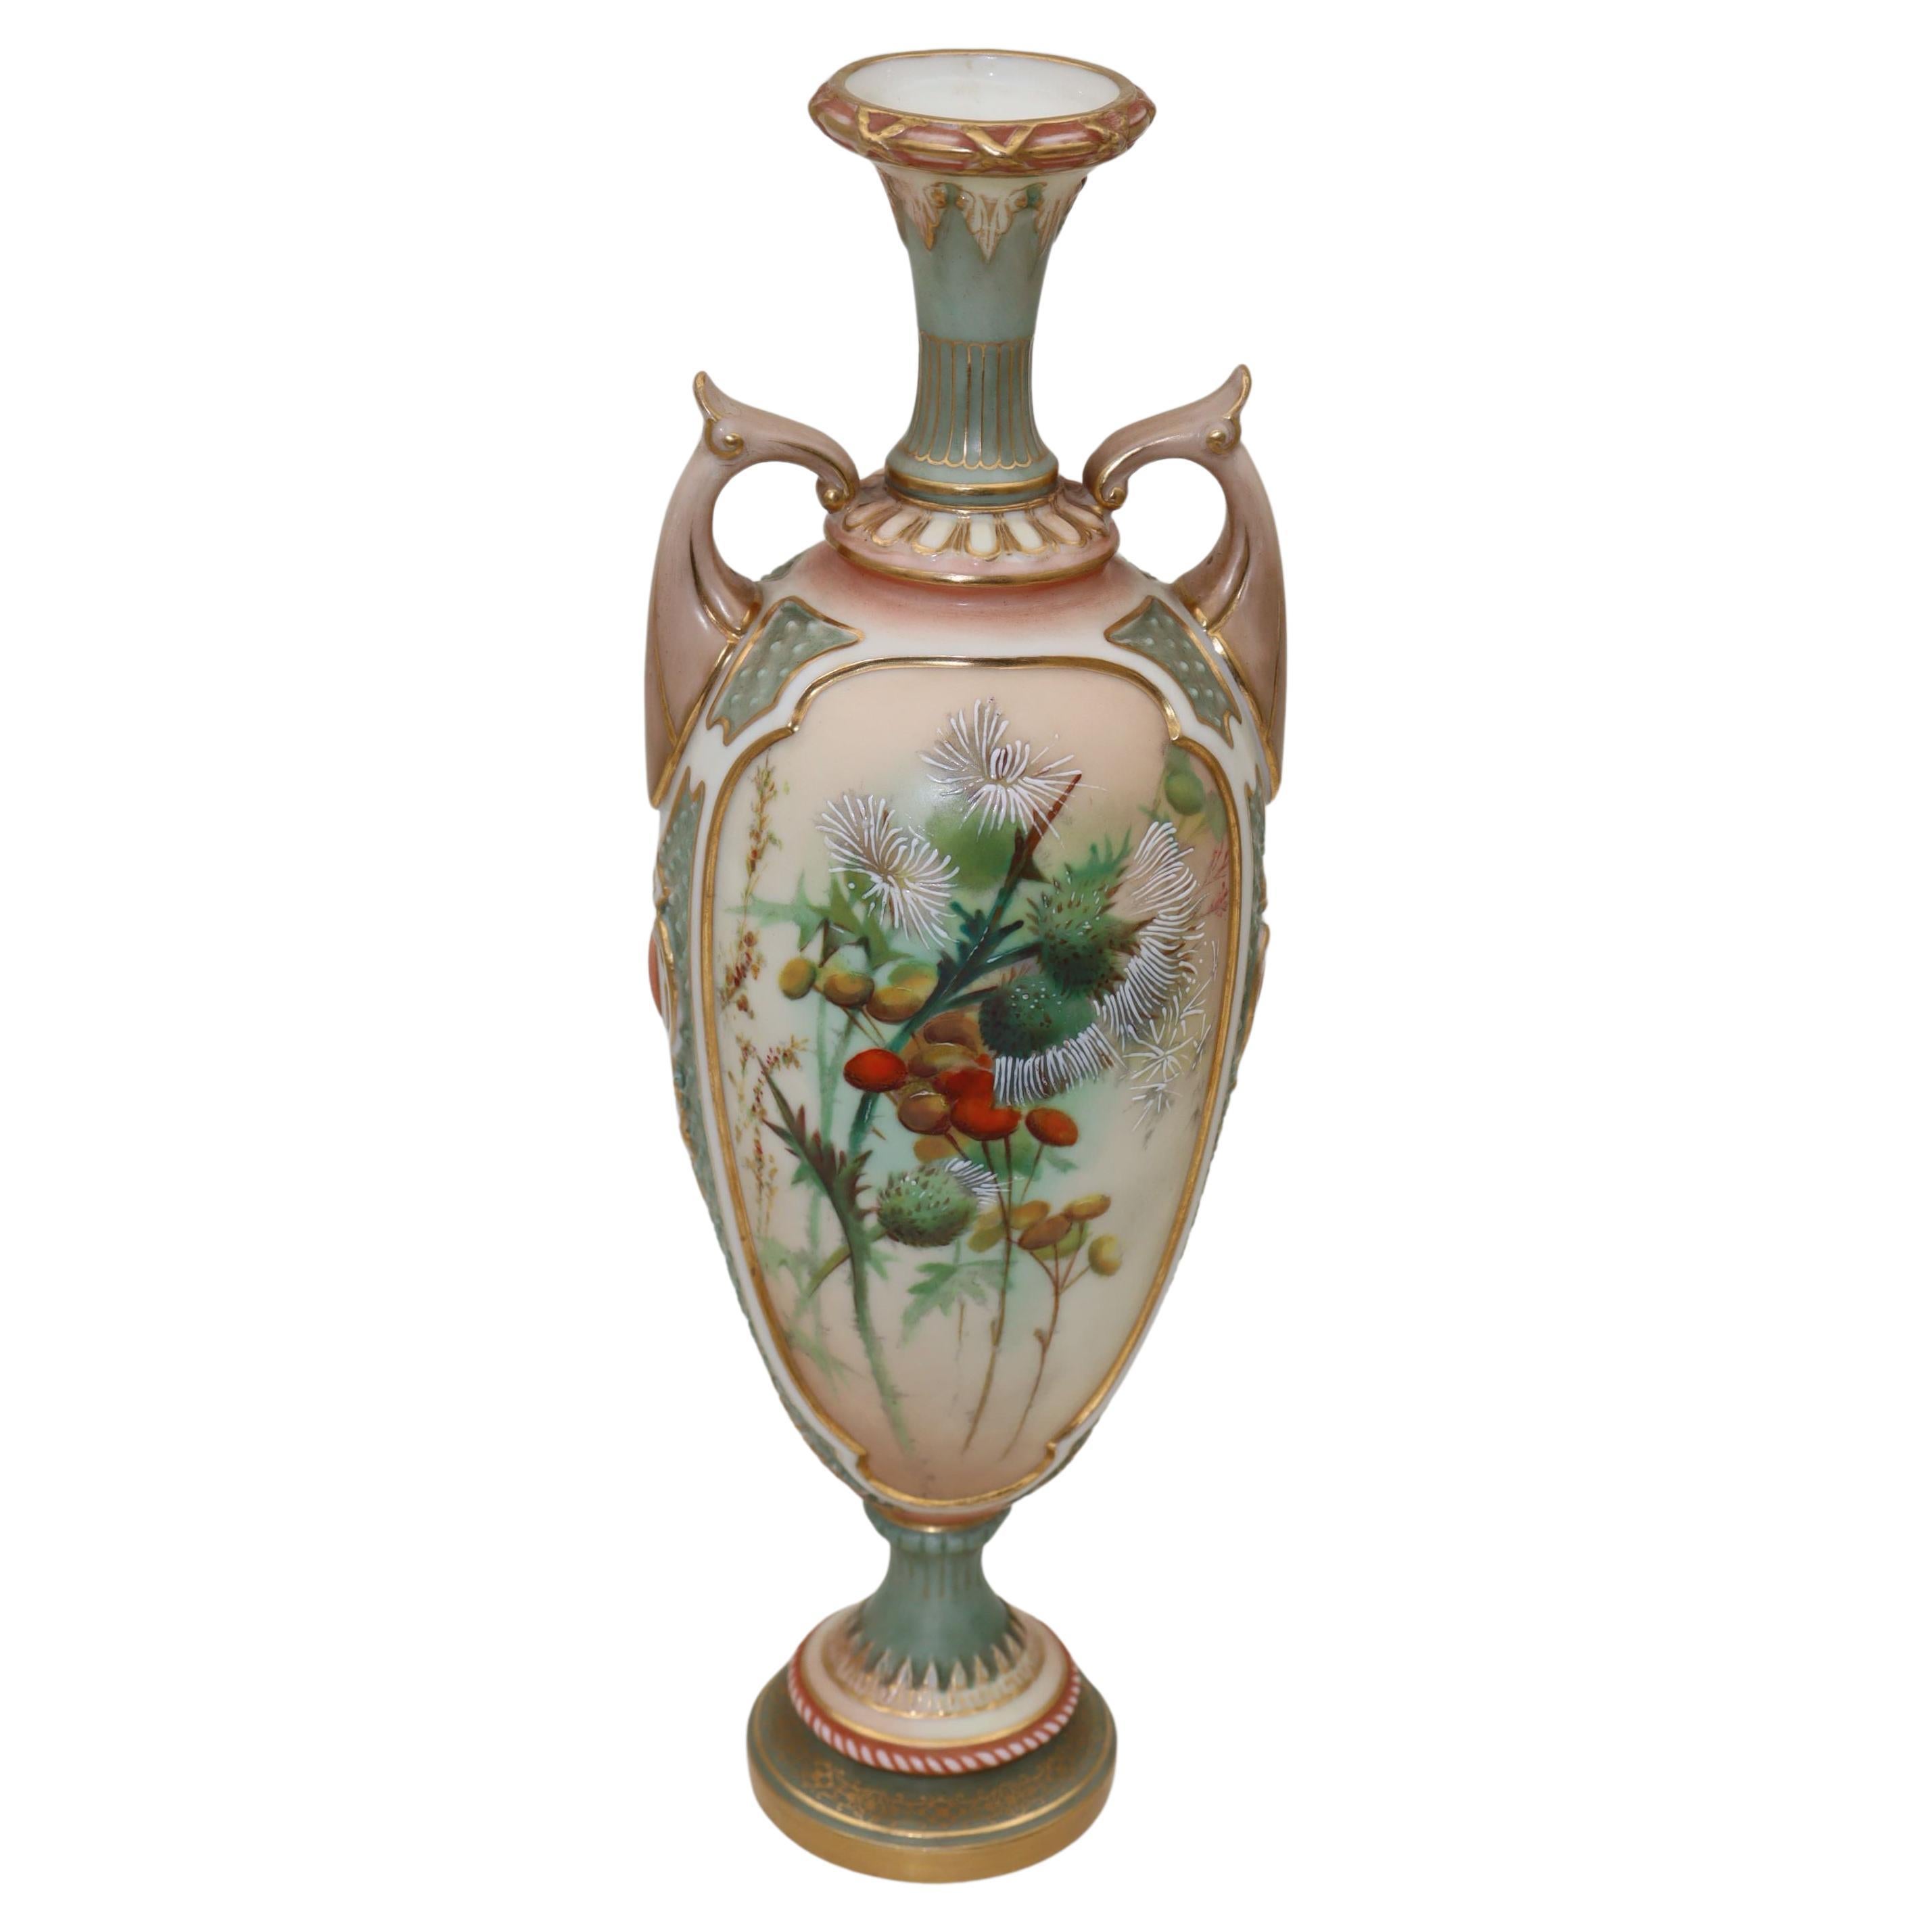 Royal Worcester vase featuring hand painted thistles